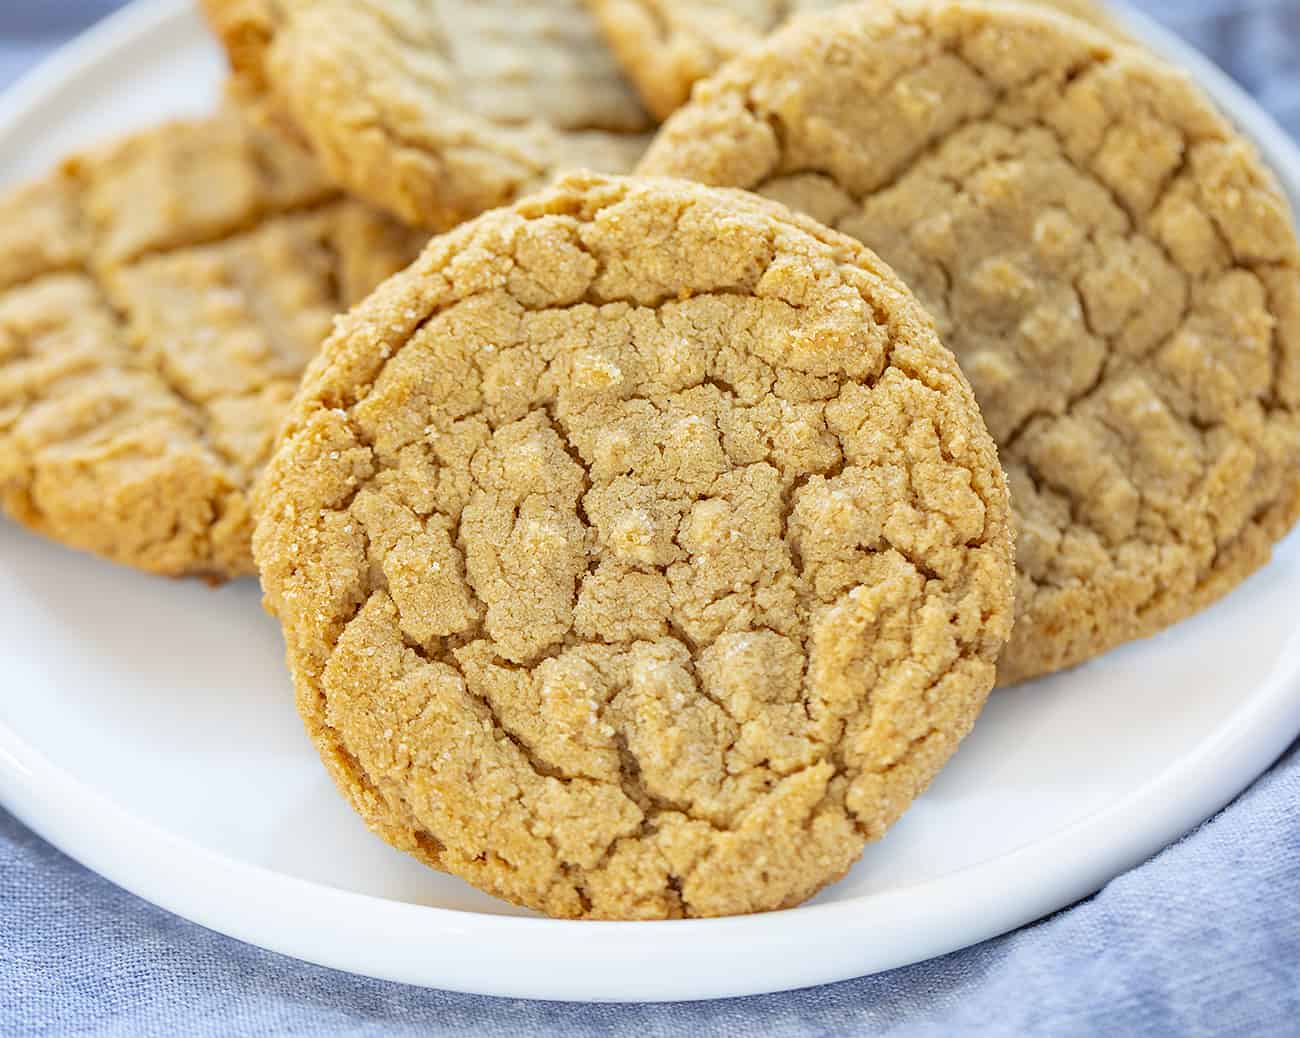 Three Ingredient Peanut Butter Cookies on a White Plate with Blue Napkin